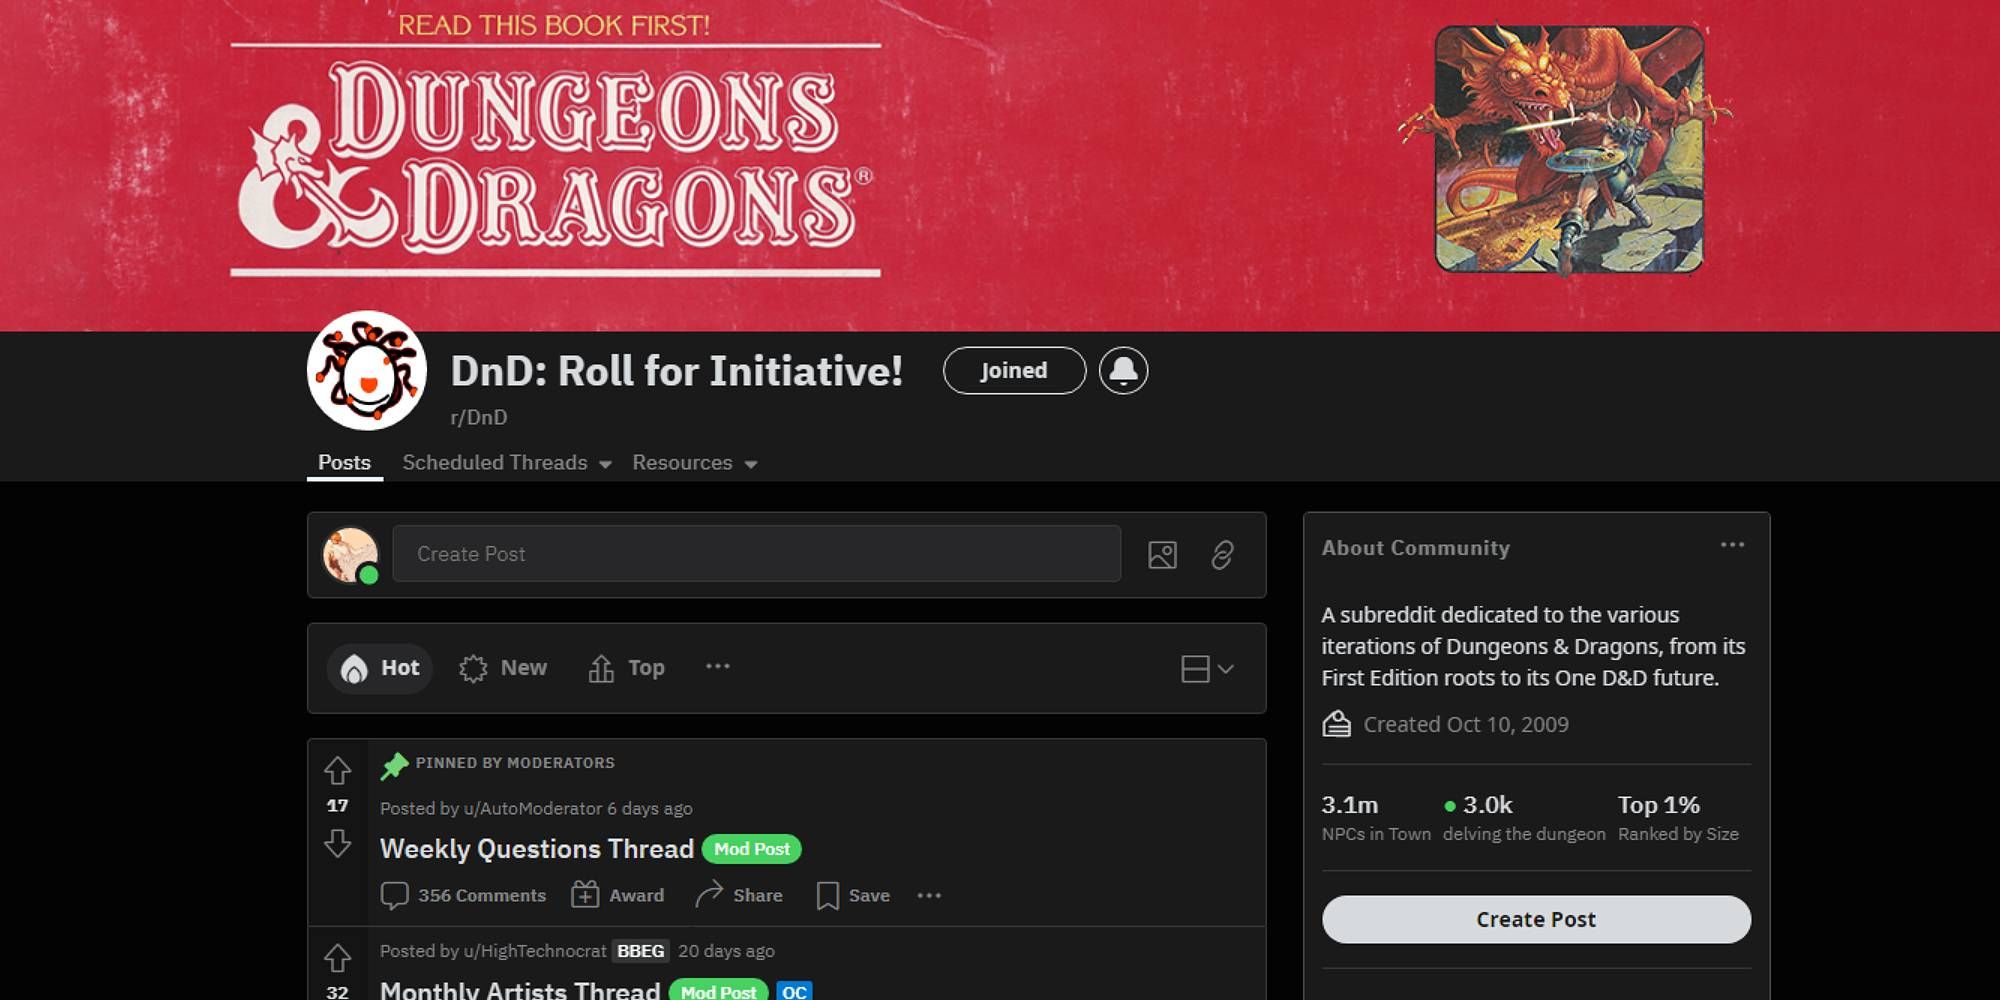 A banner displaying Dungeons and Dragons is above the community board